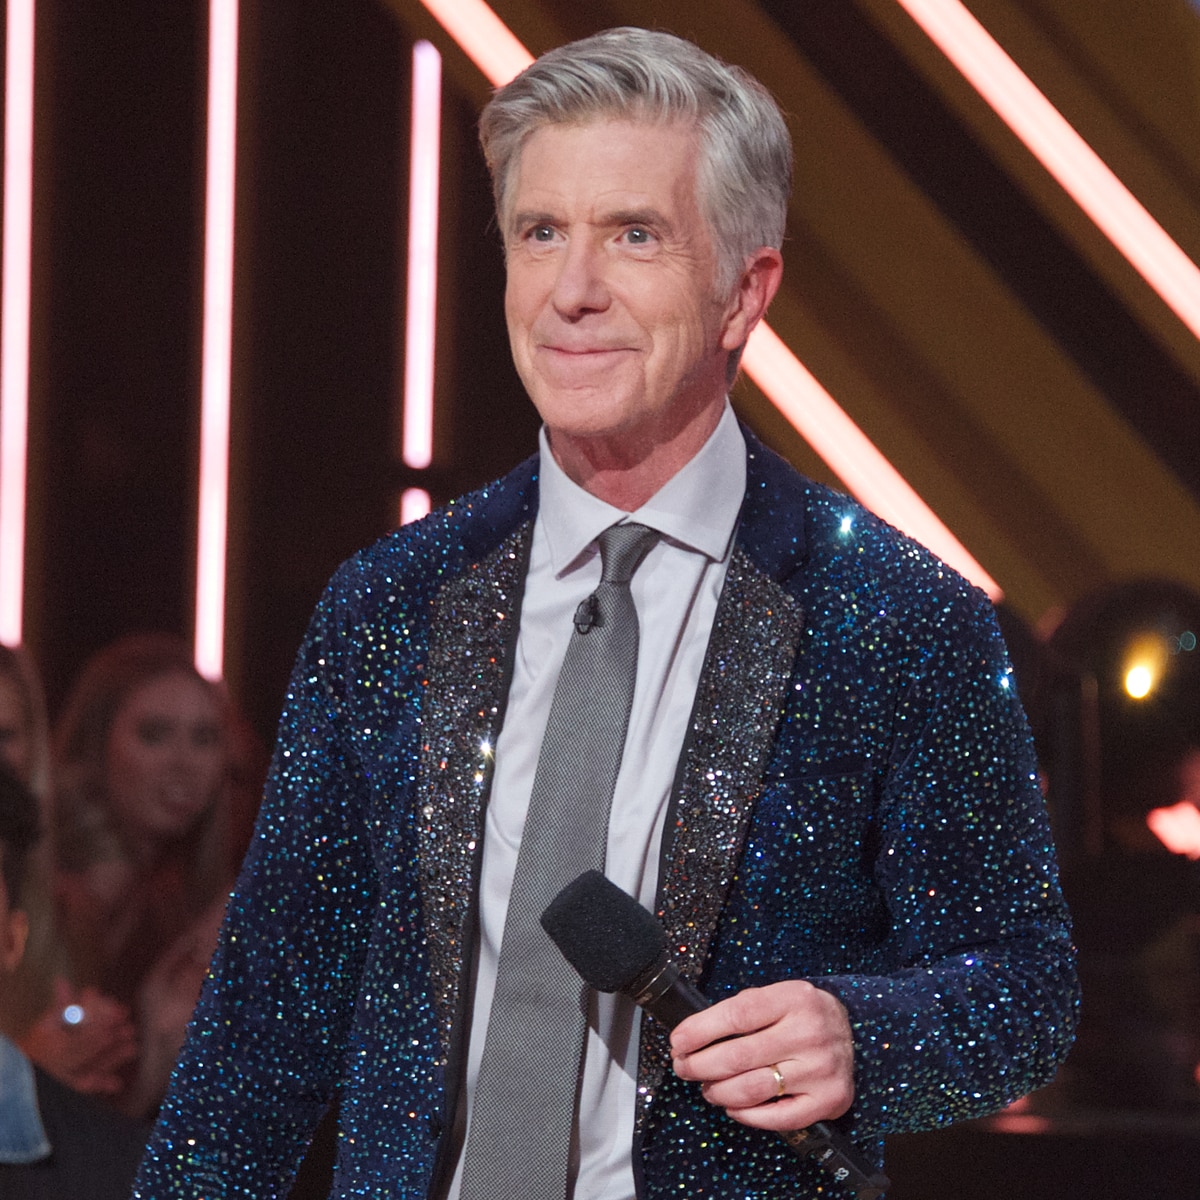 TOM BERGERON, DANCING WITH THE STARS